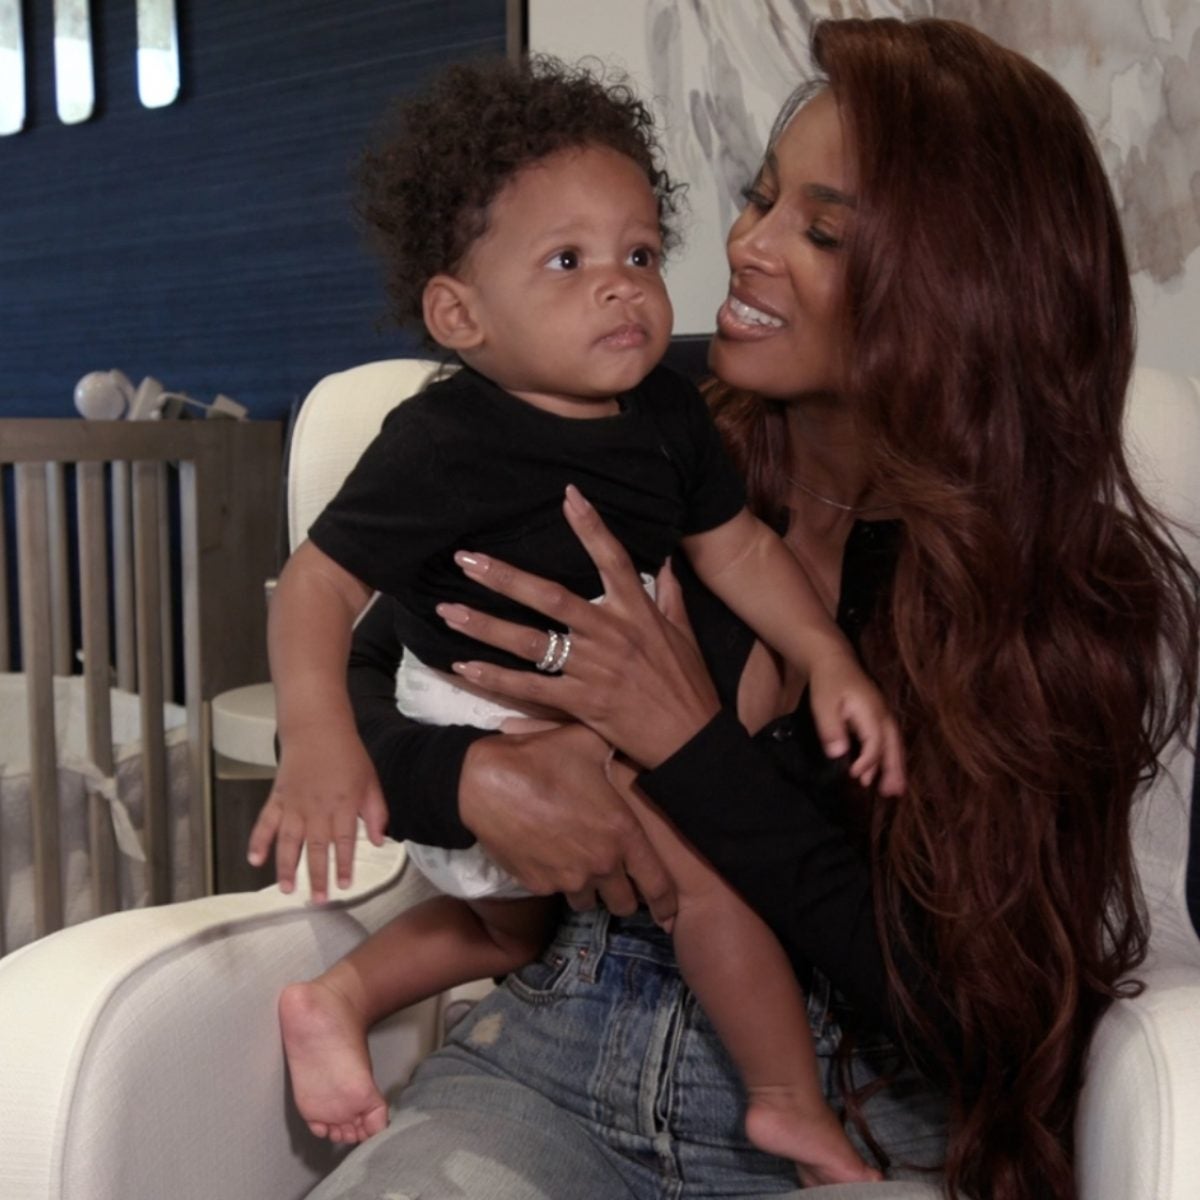 What Ciara Did For Herself While Single That Helped Make Her A Better Mom And Wife